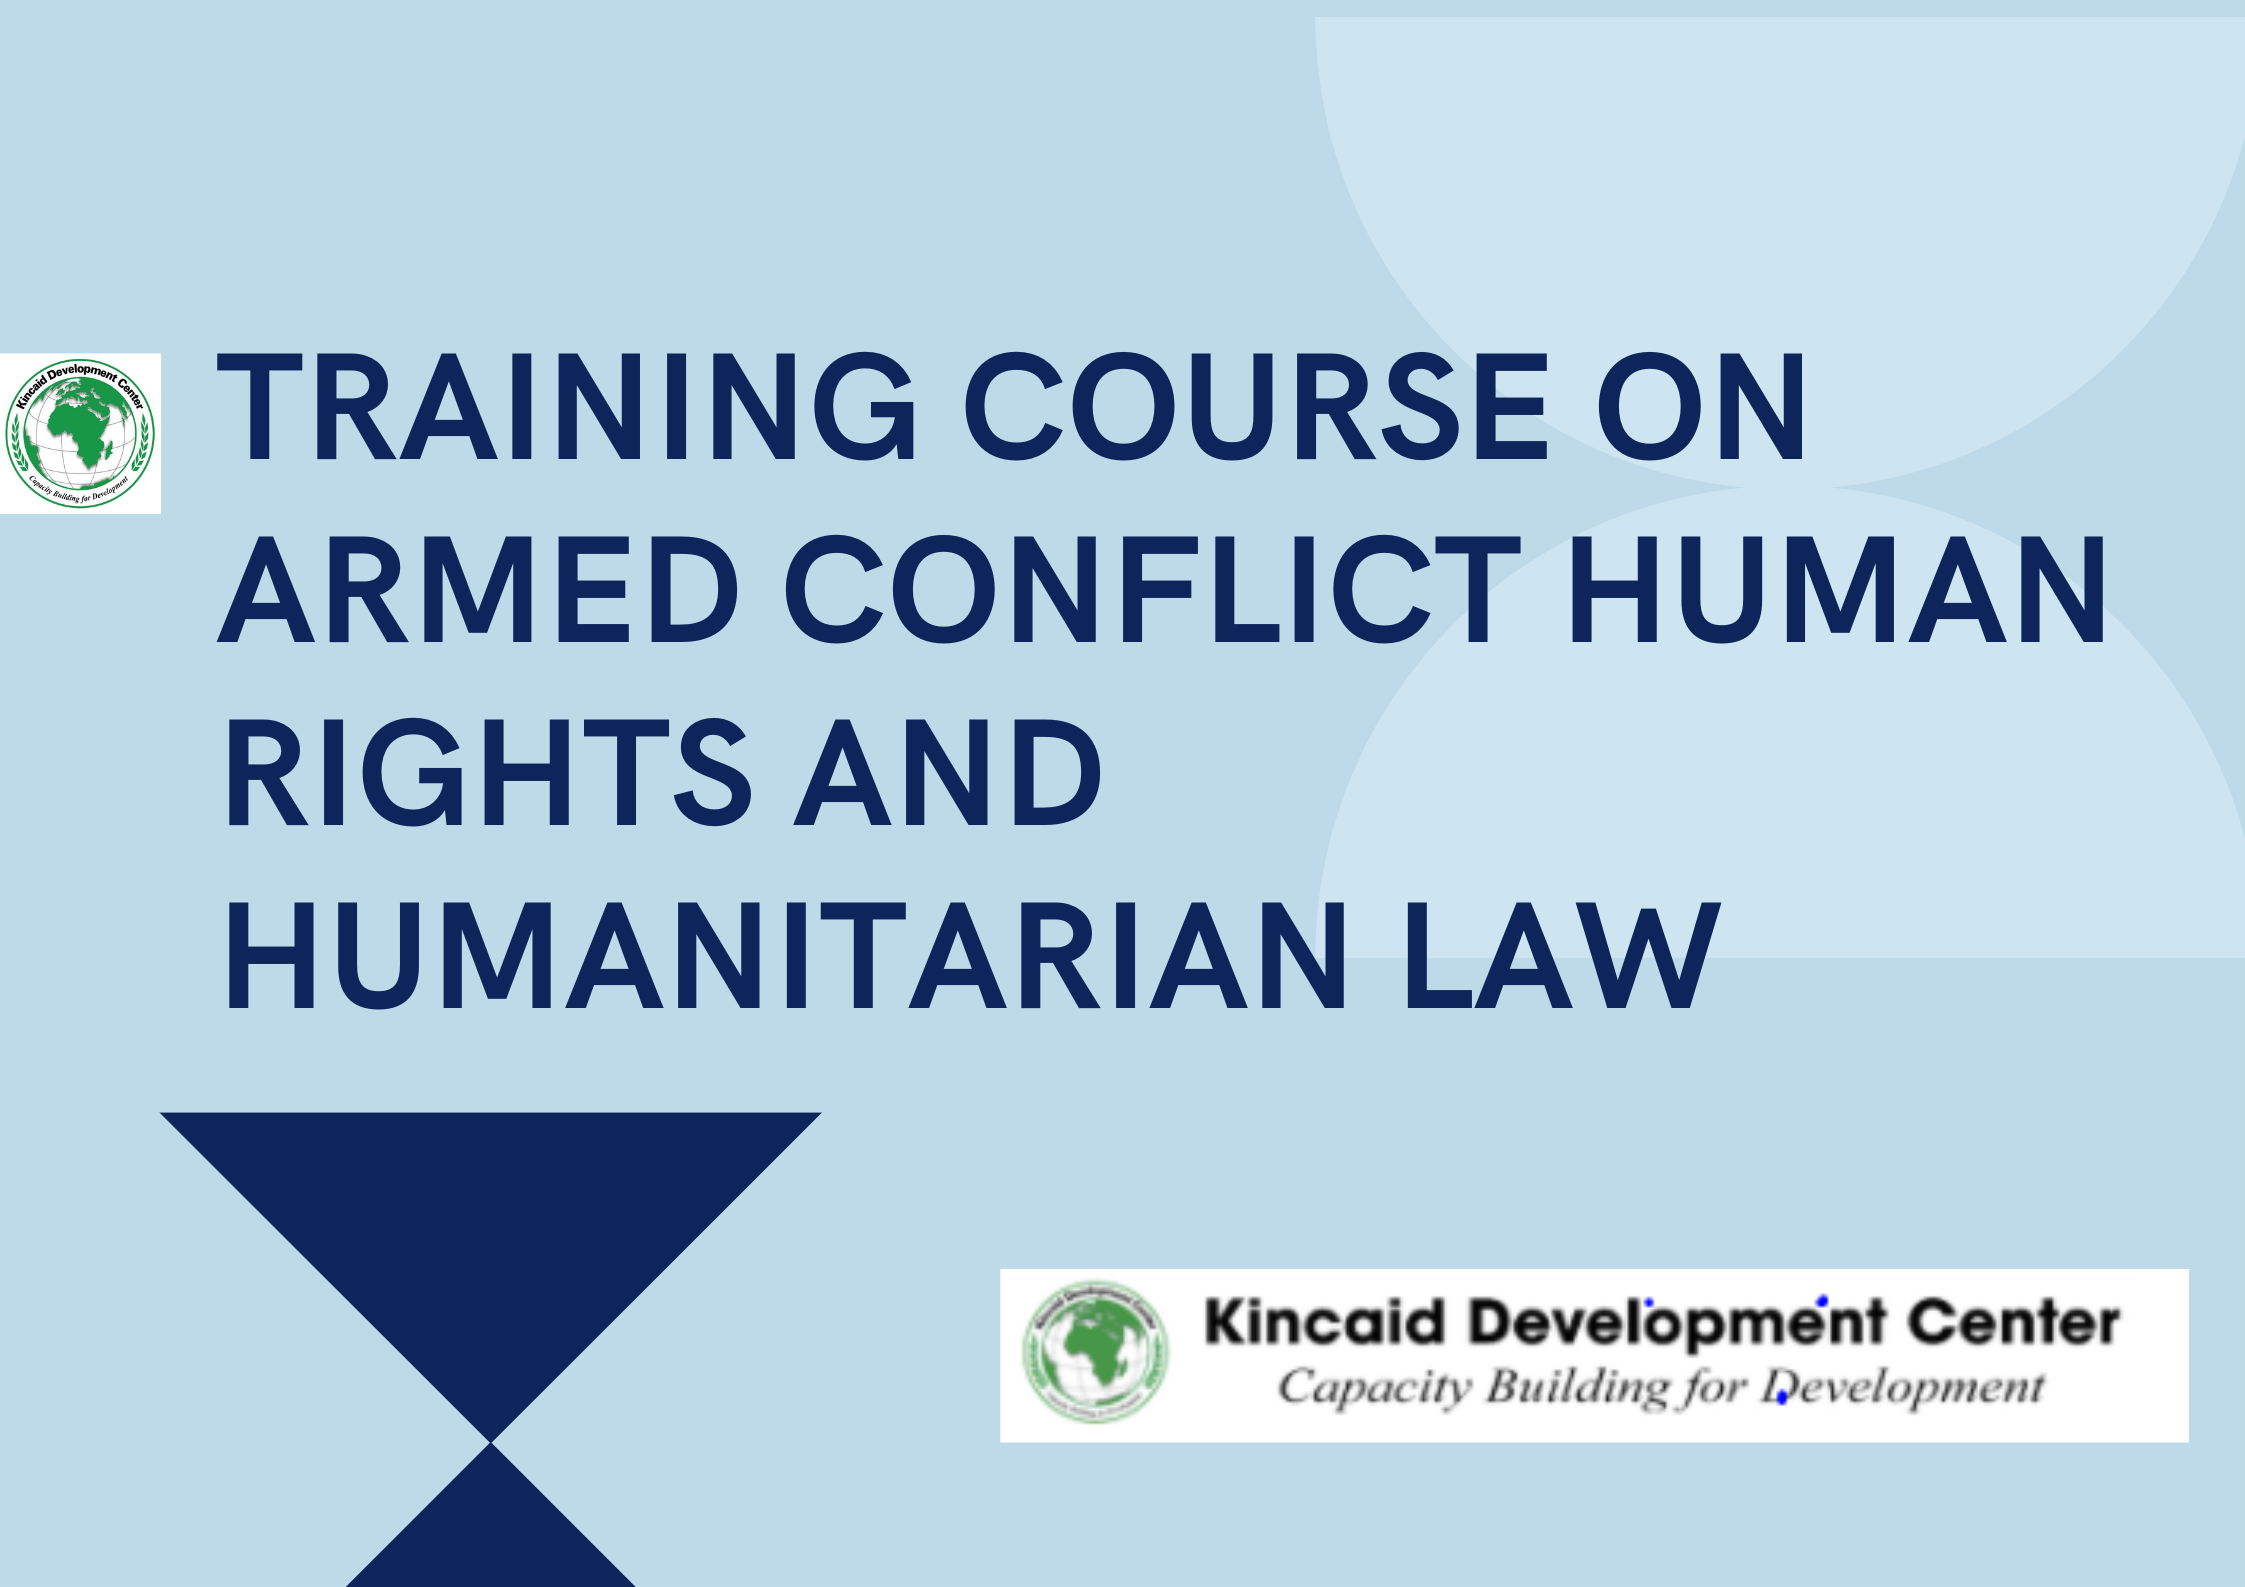 TRAINING COURSE ON ARMED CONFLICT HUMAN RIGHTS AND HUMANITARIAN LAW, Nairobi, Kenya